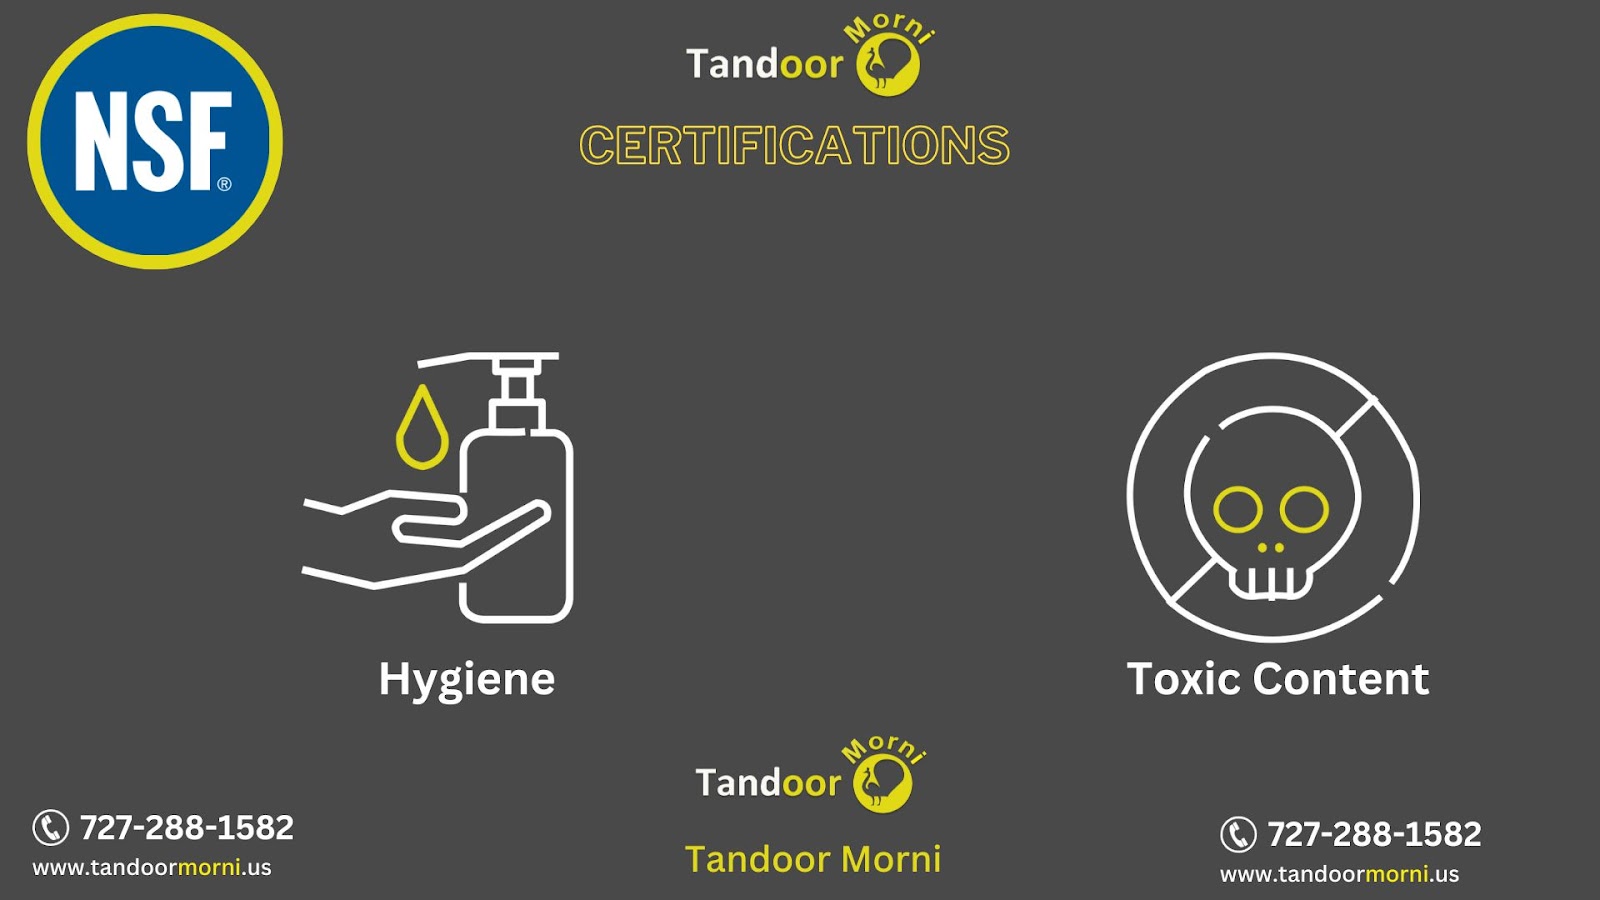 The tandoor's hazardous and hygiene parameters are governed by NSF certification.